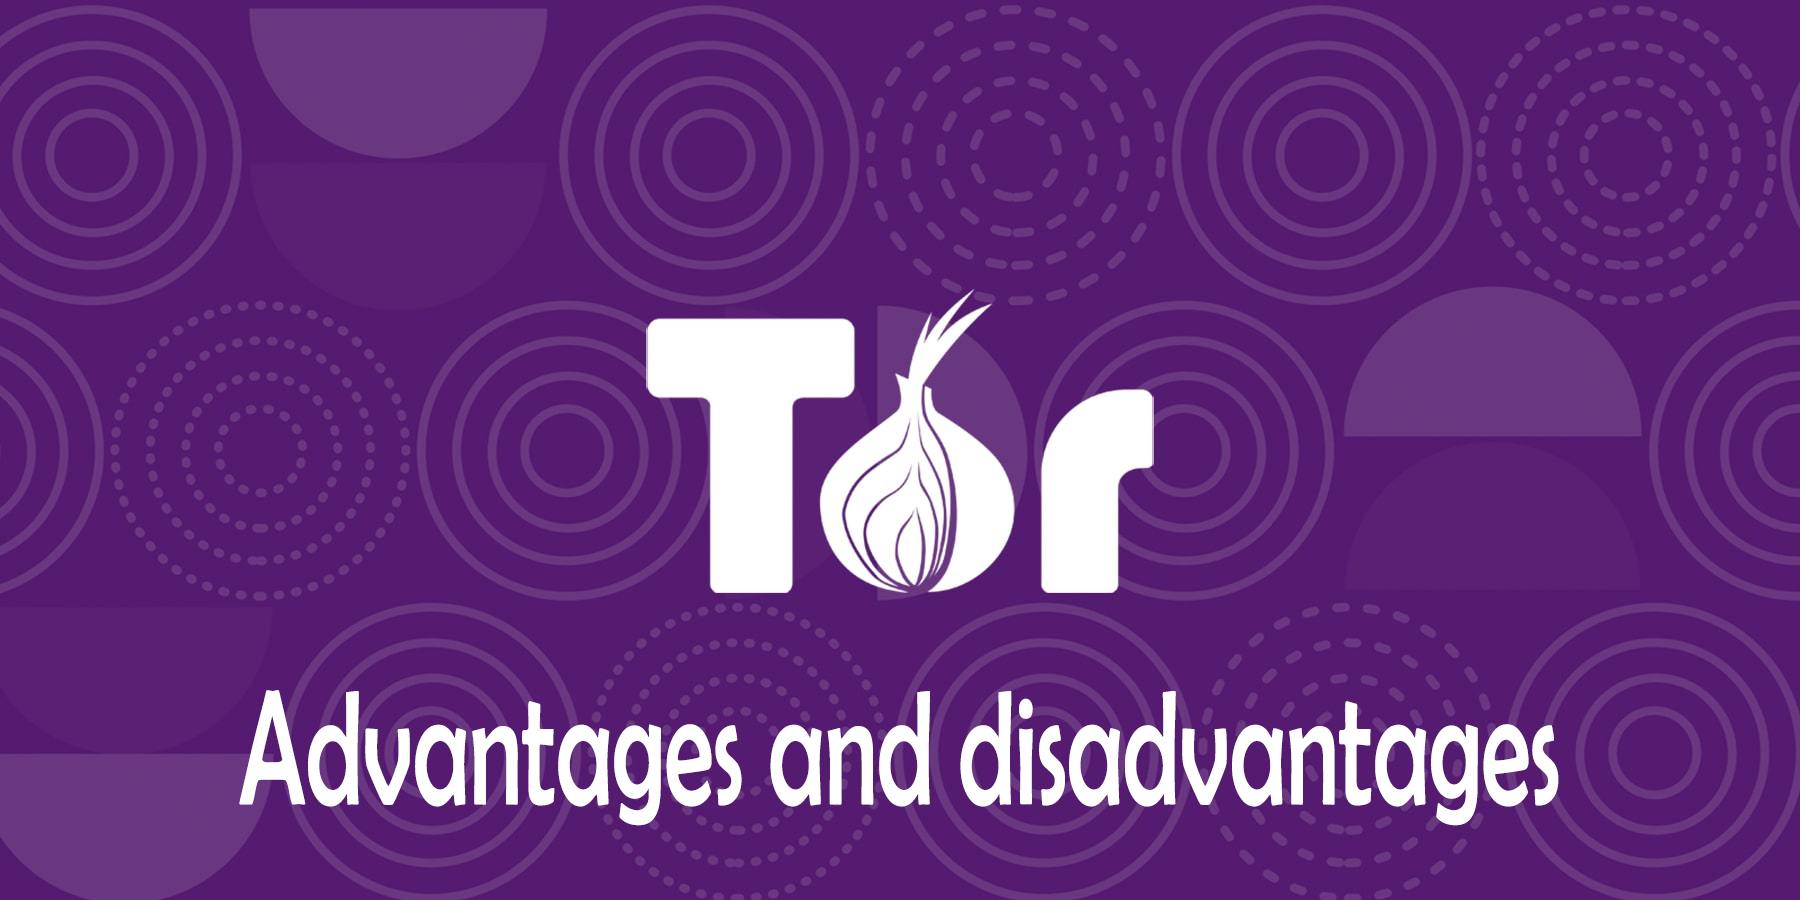 Benefits of tor browser